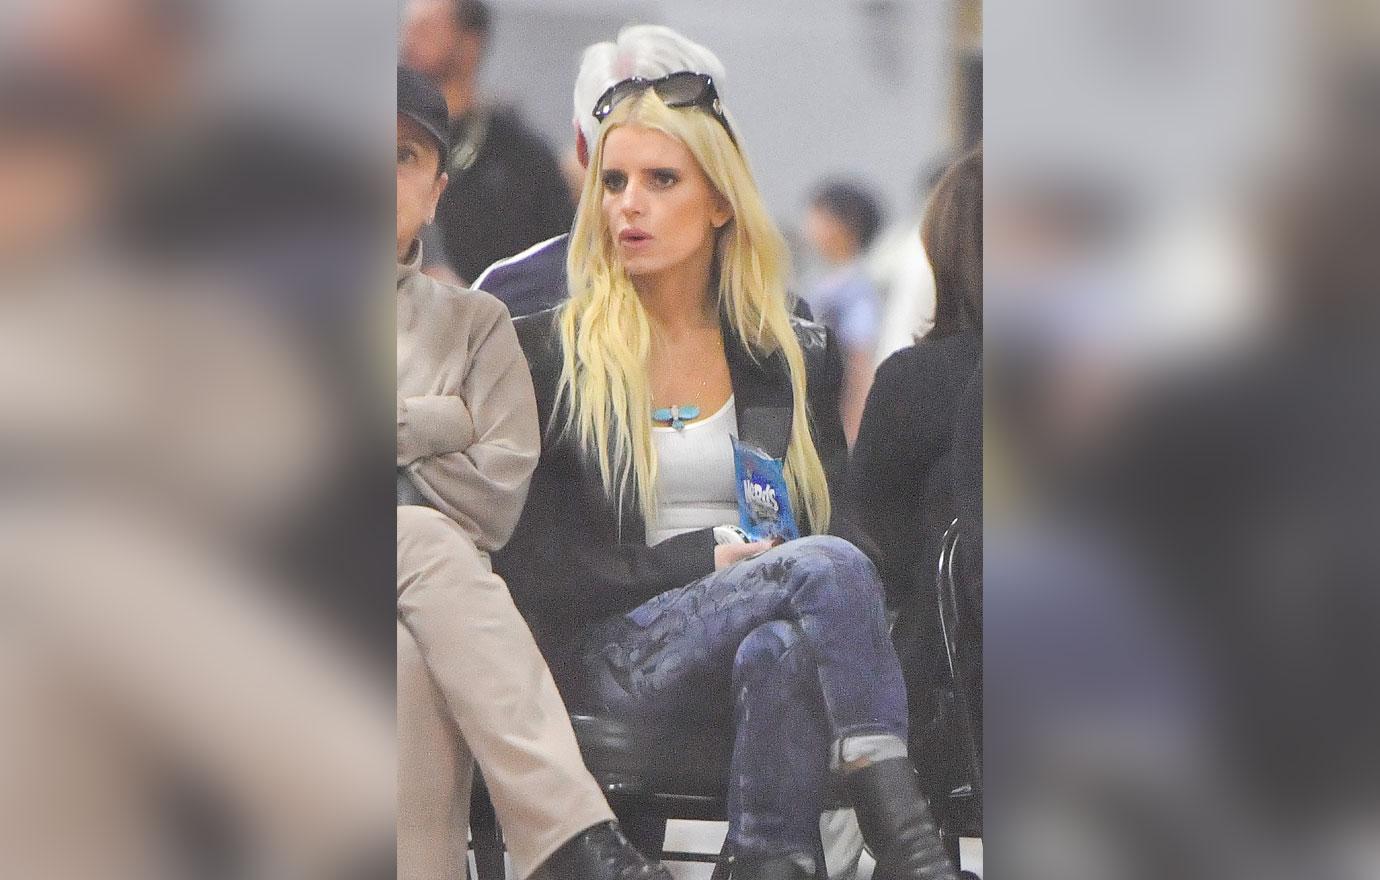 Jessica Simpson Sparks Weight Worries With Yoga Stretch - The Blast